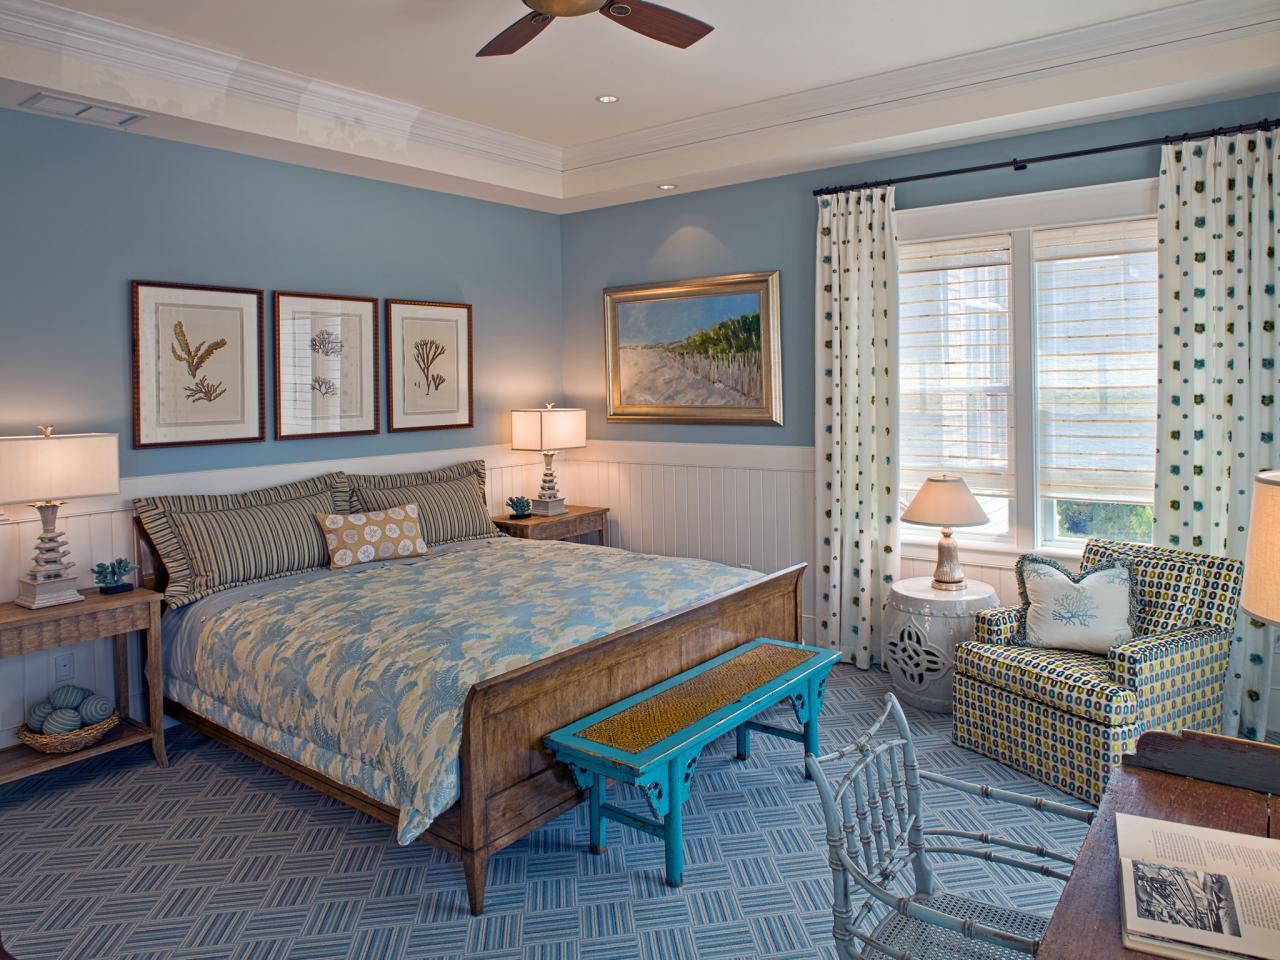 Decorating Master Bedroom Ideas With Blue Color